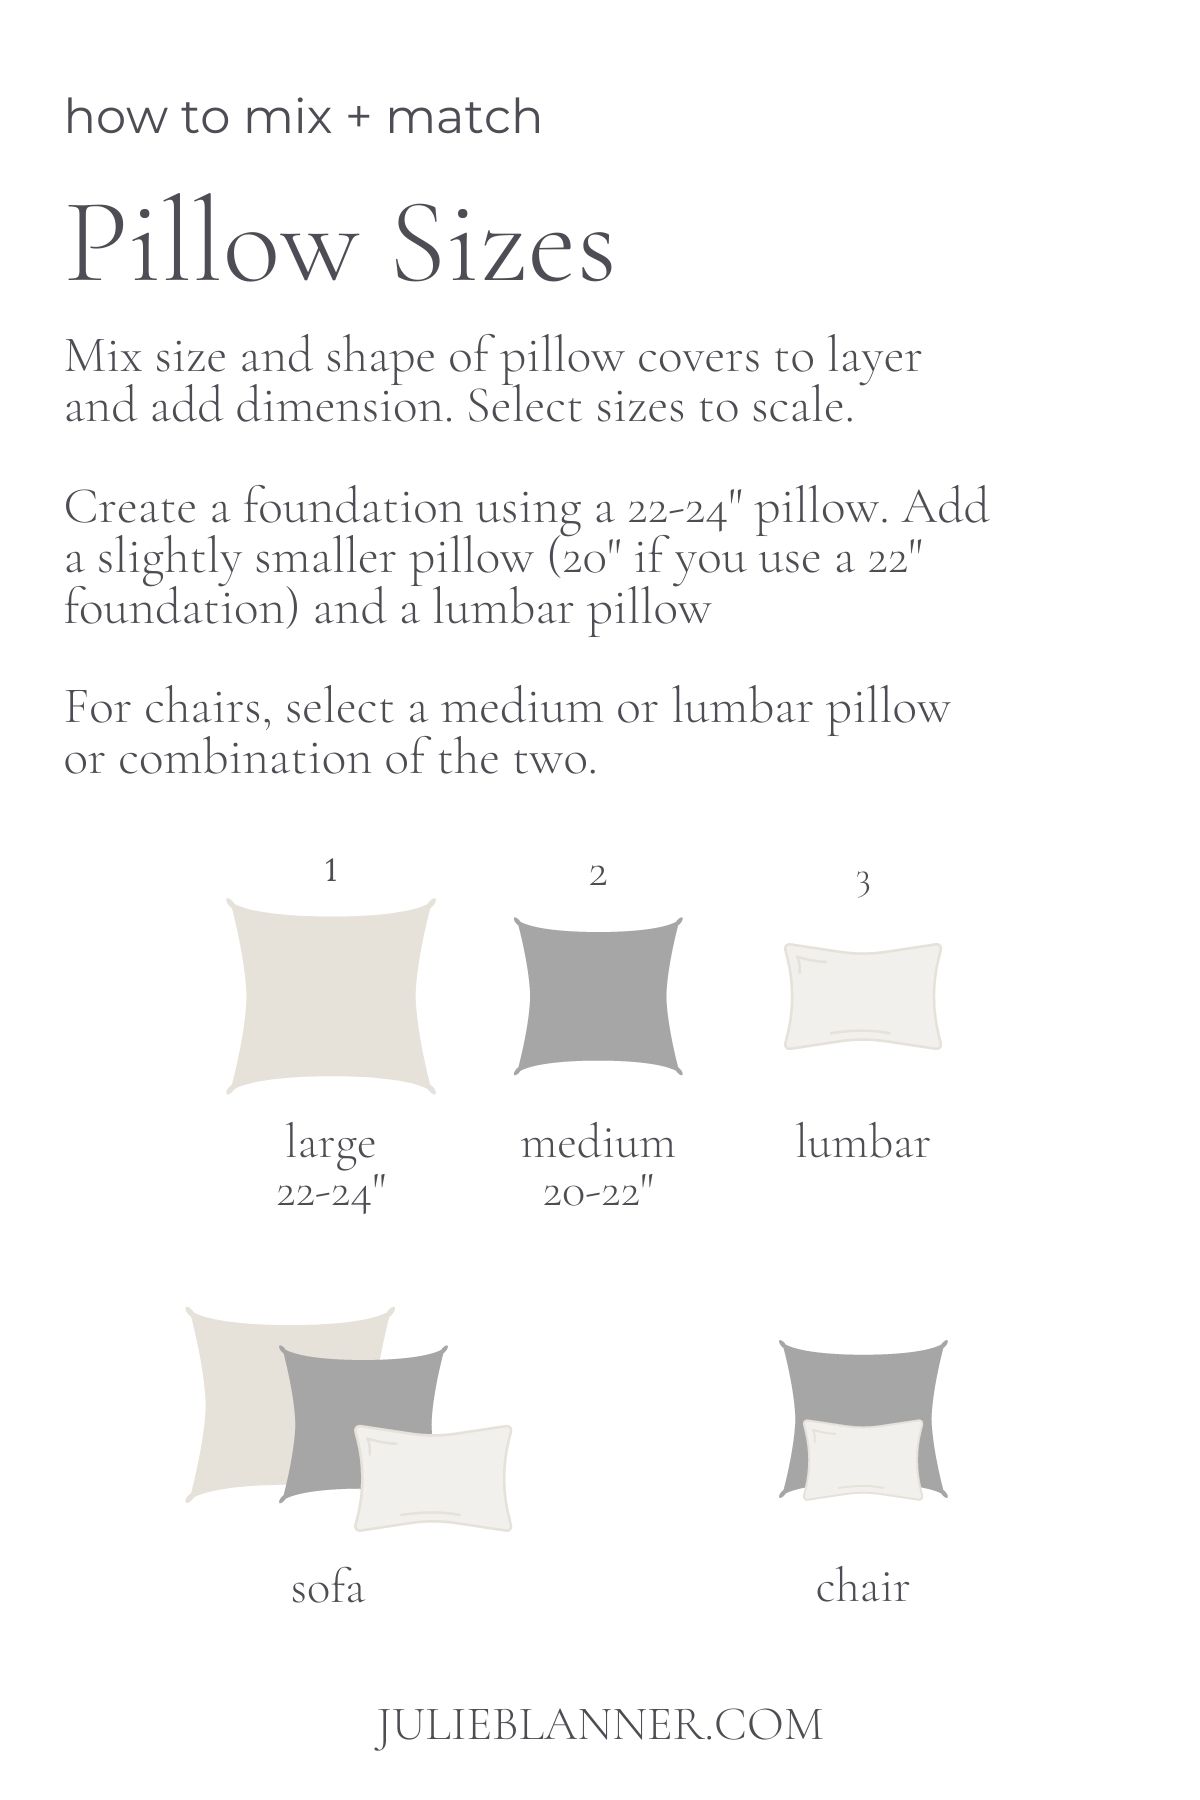 A graphic that showcases sizes and styles of pillow covers